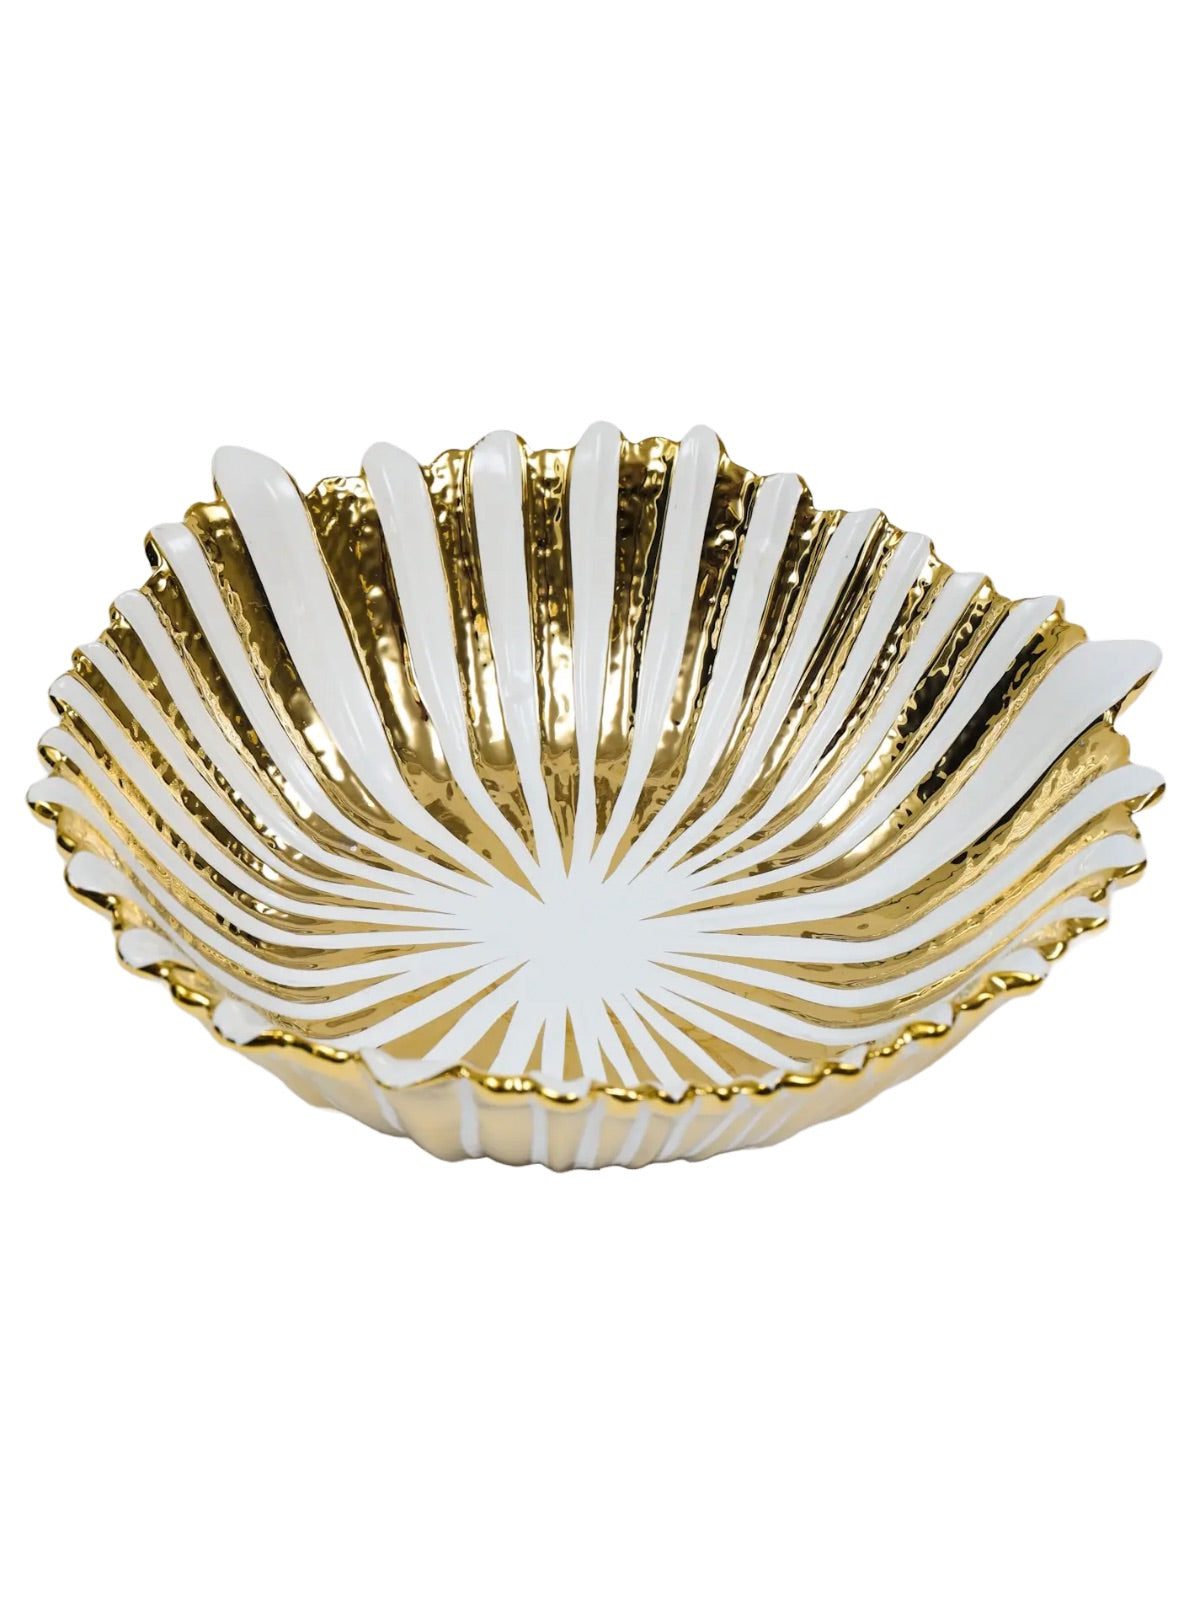 White and Gold Striped Flower Ceramic Shaped Salad Bowl, Measuring 4D x 3H.